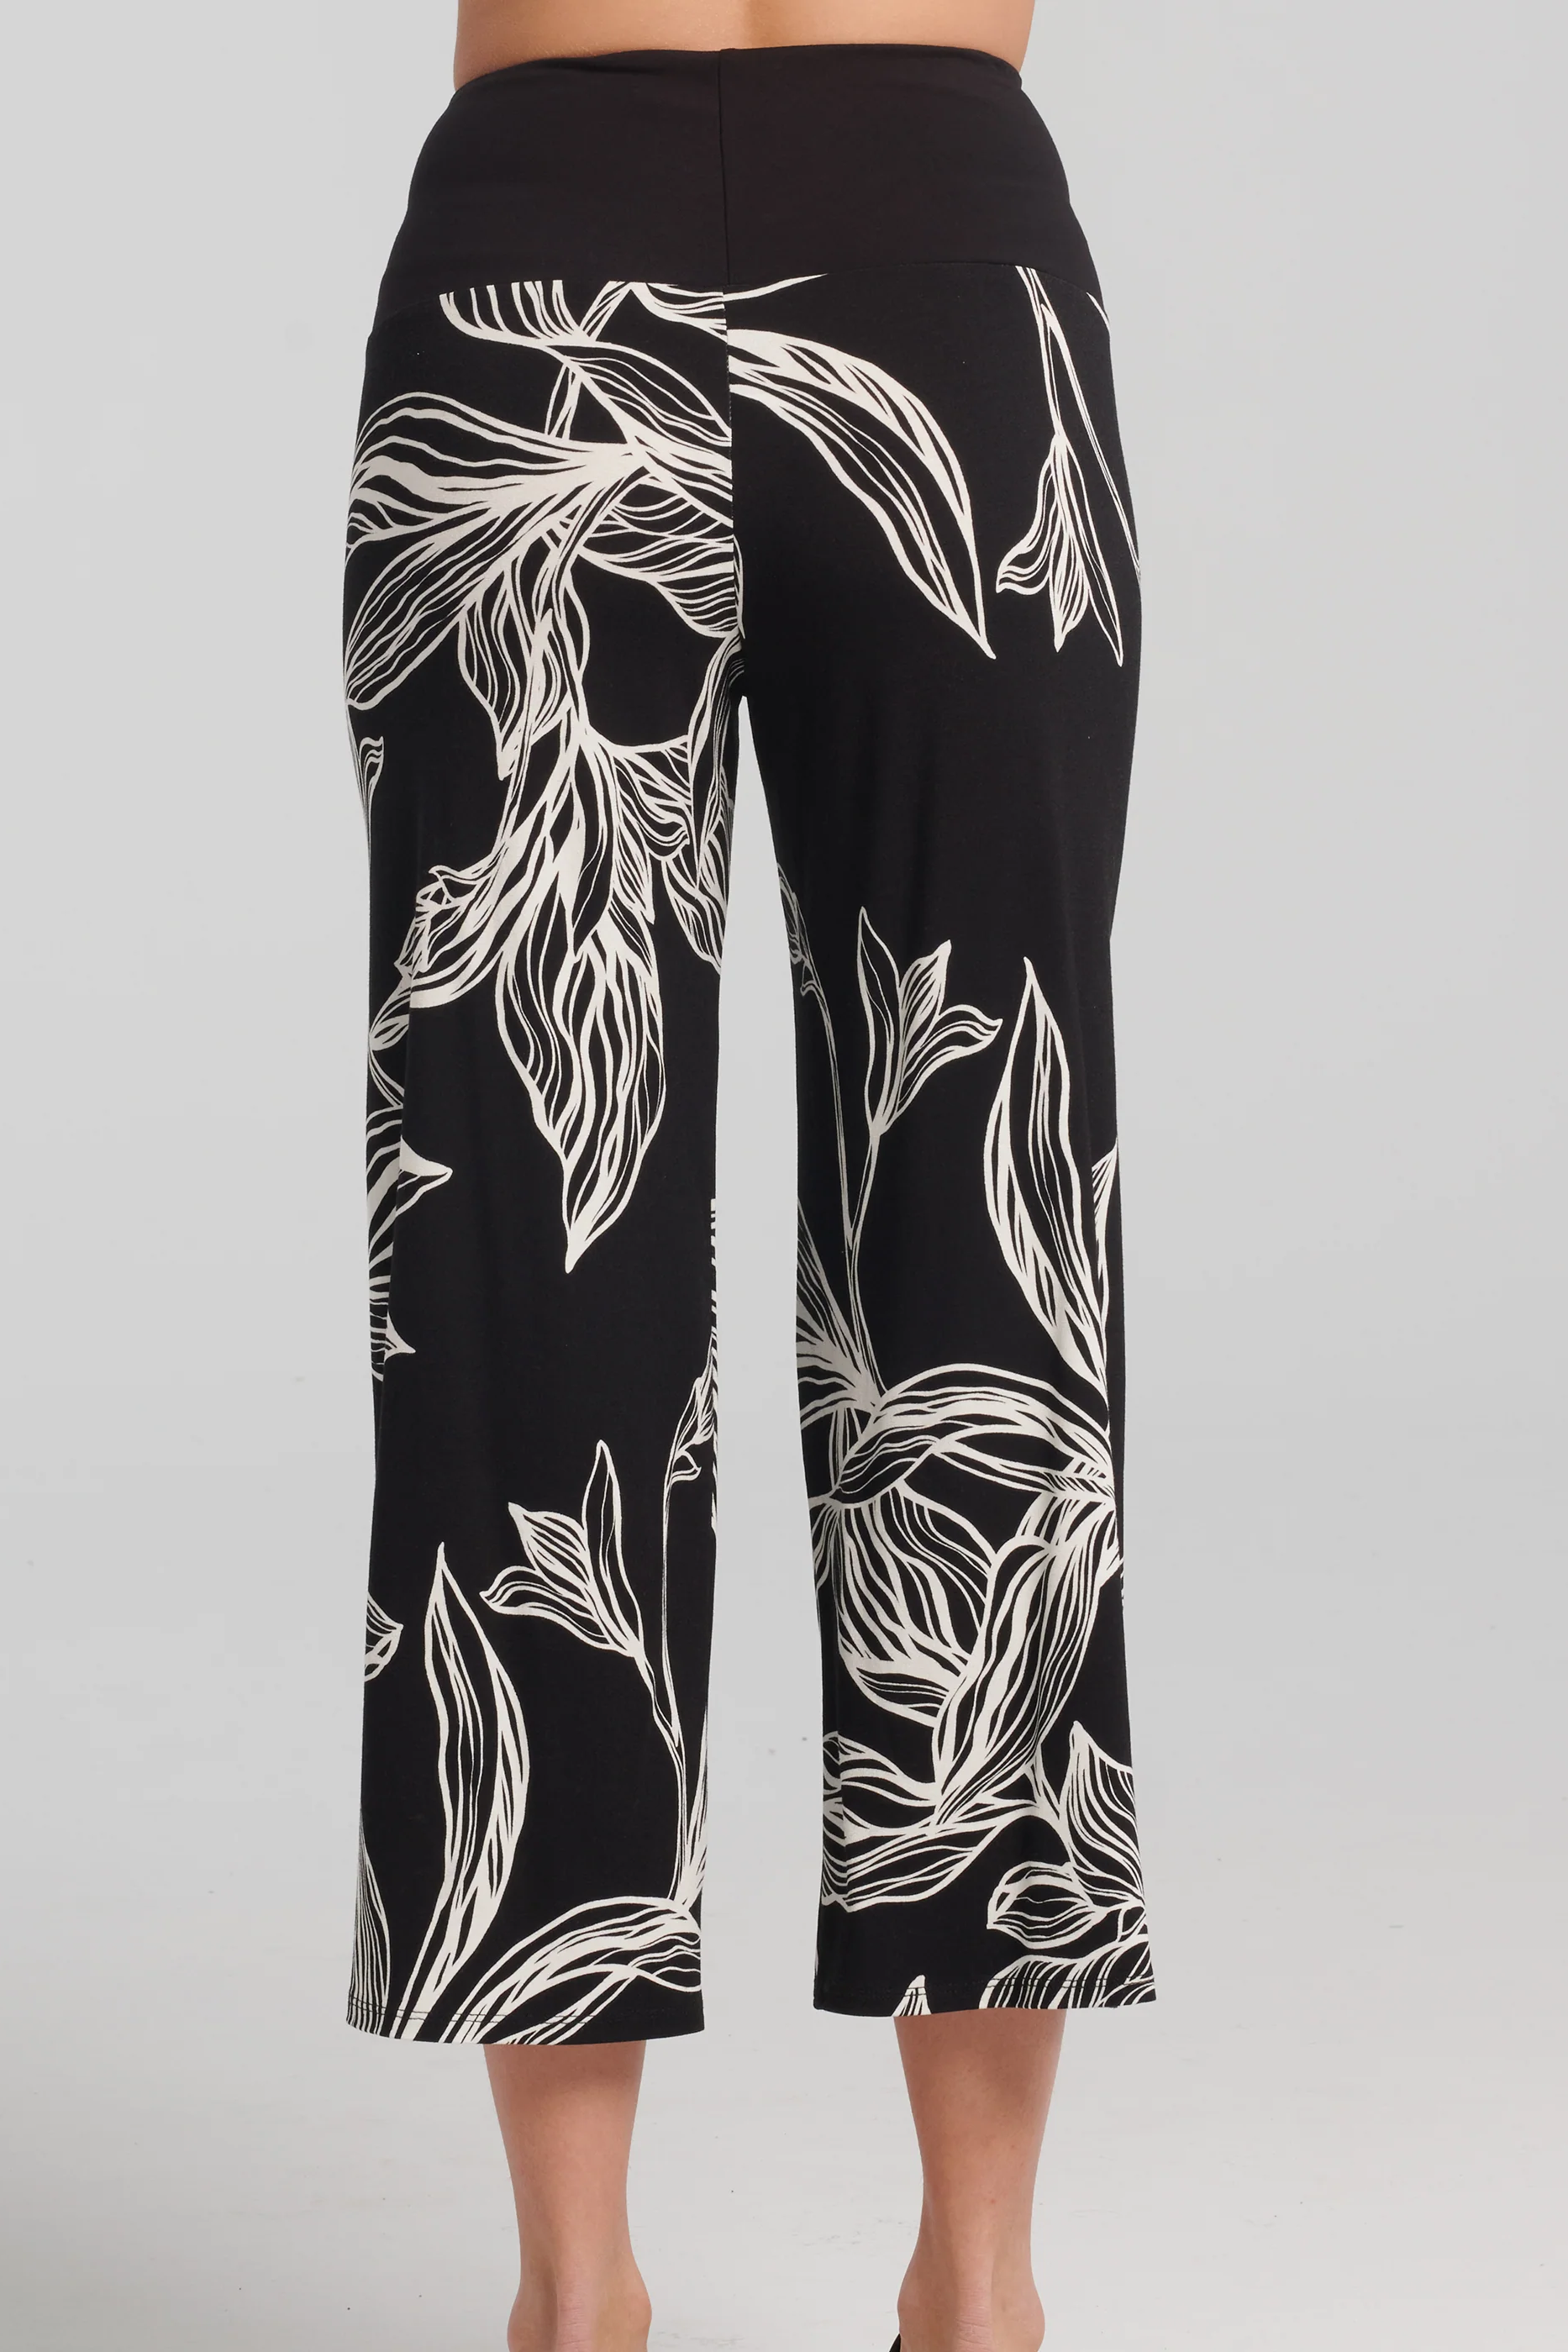 Thora Pants by Kollontai, Black and white leaf print, back view, solid black pull-on waistband, wide legs, slightly cropped, sizes XS to XXL, made in Montreal